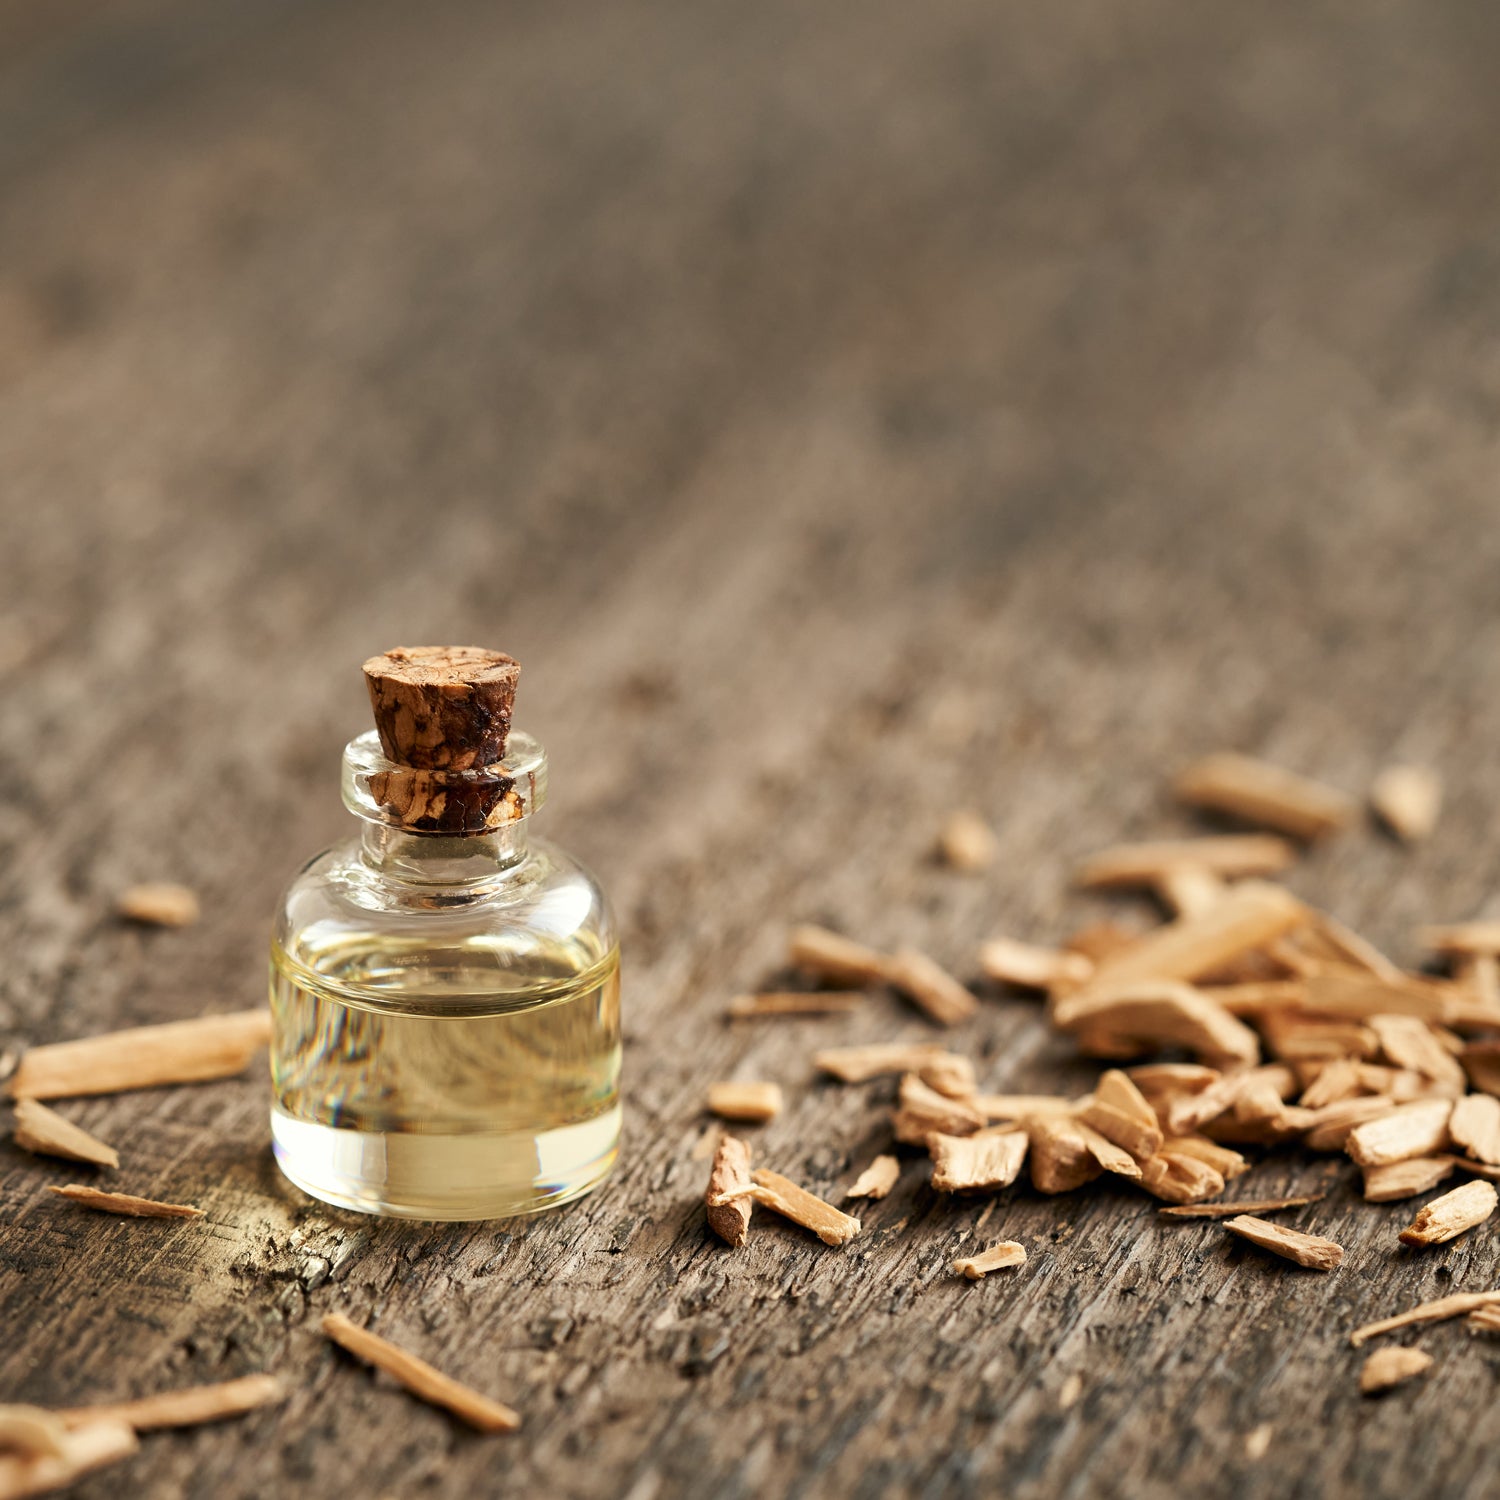 A vial of cedar wood essential oil - one of the key notes in our "Tundra Meditation" scented candle